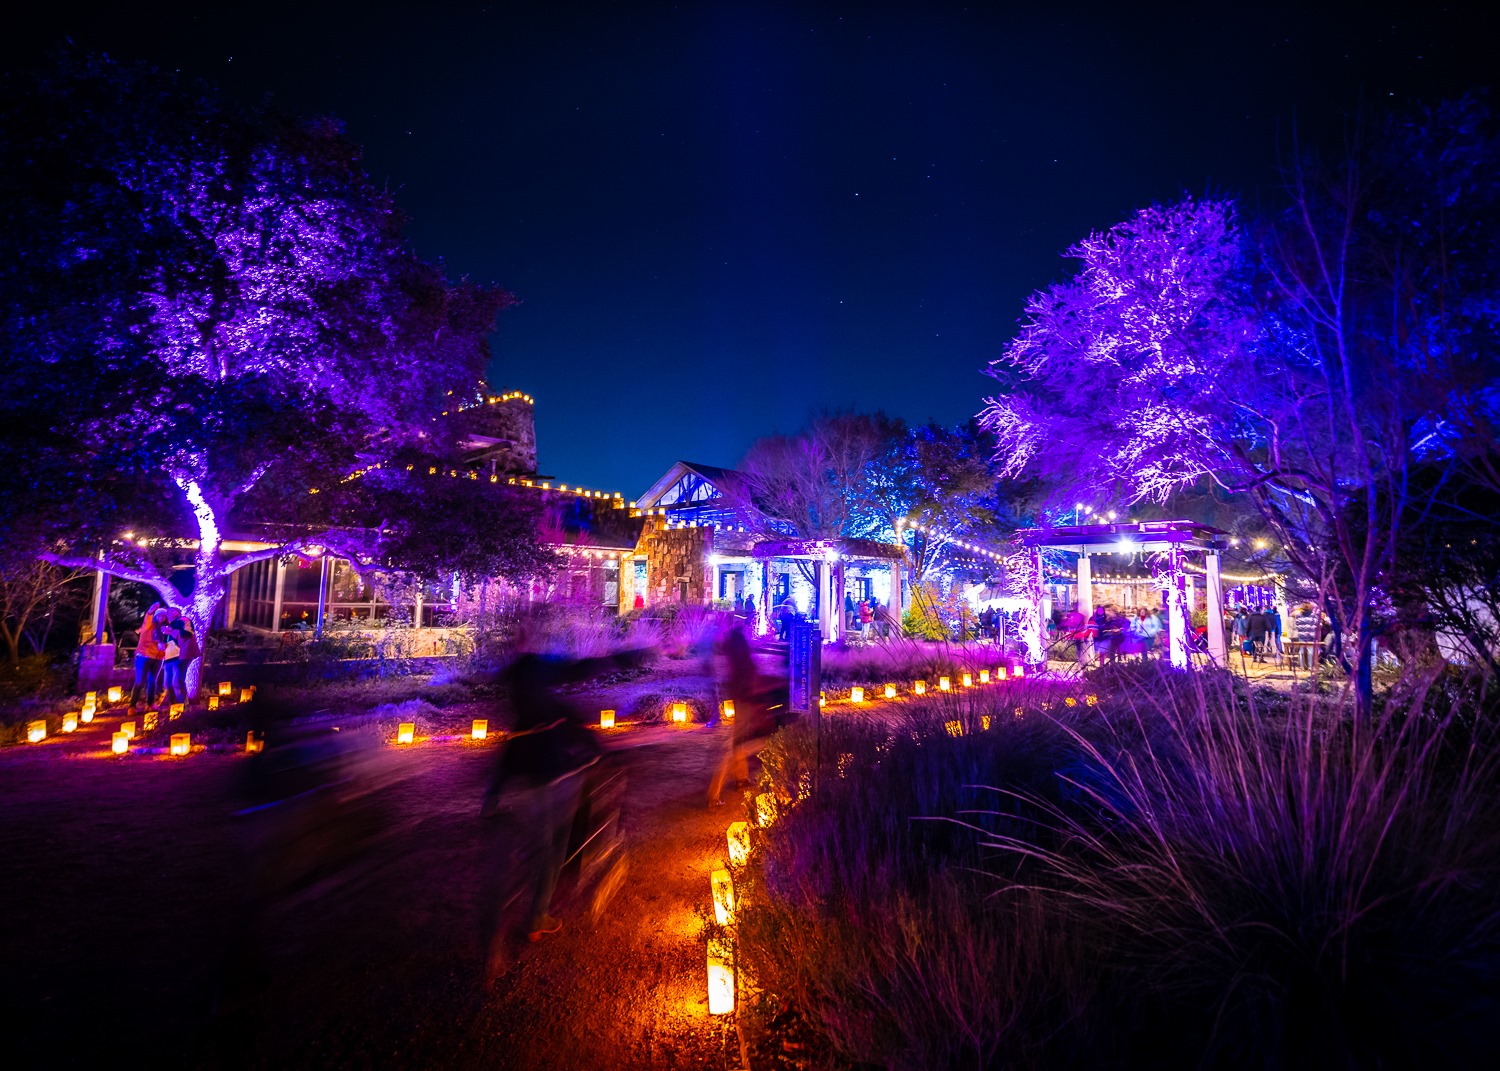 The Lady Bird Johnson Wildflower Center lit up with Christmas lights.